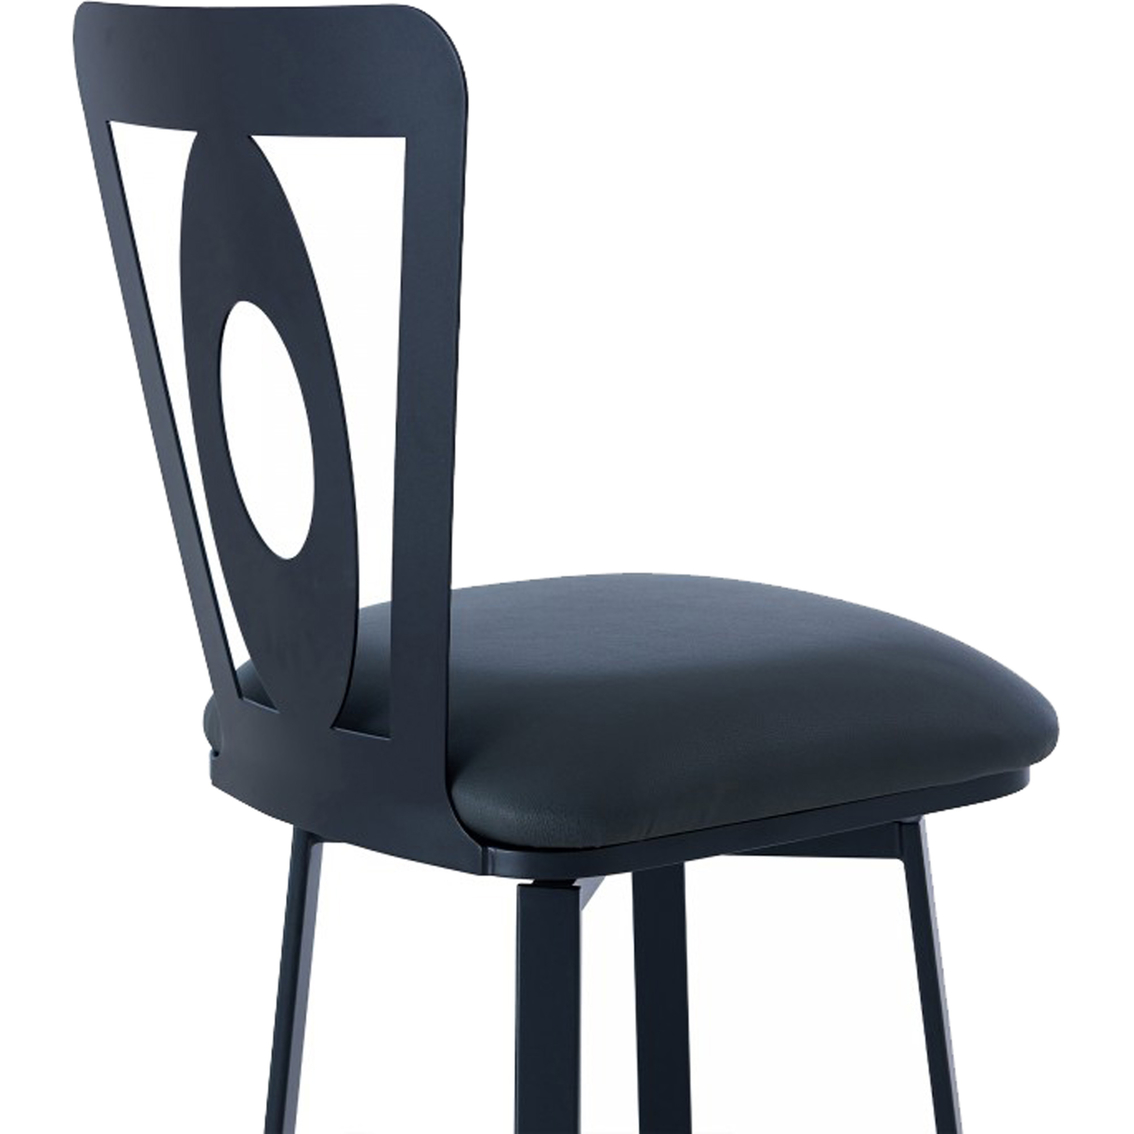 Armen Living Lola Barstool in Matte Black Finish and Grey Faux Leather - Image 5 of 7